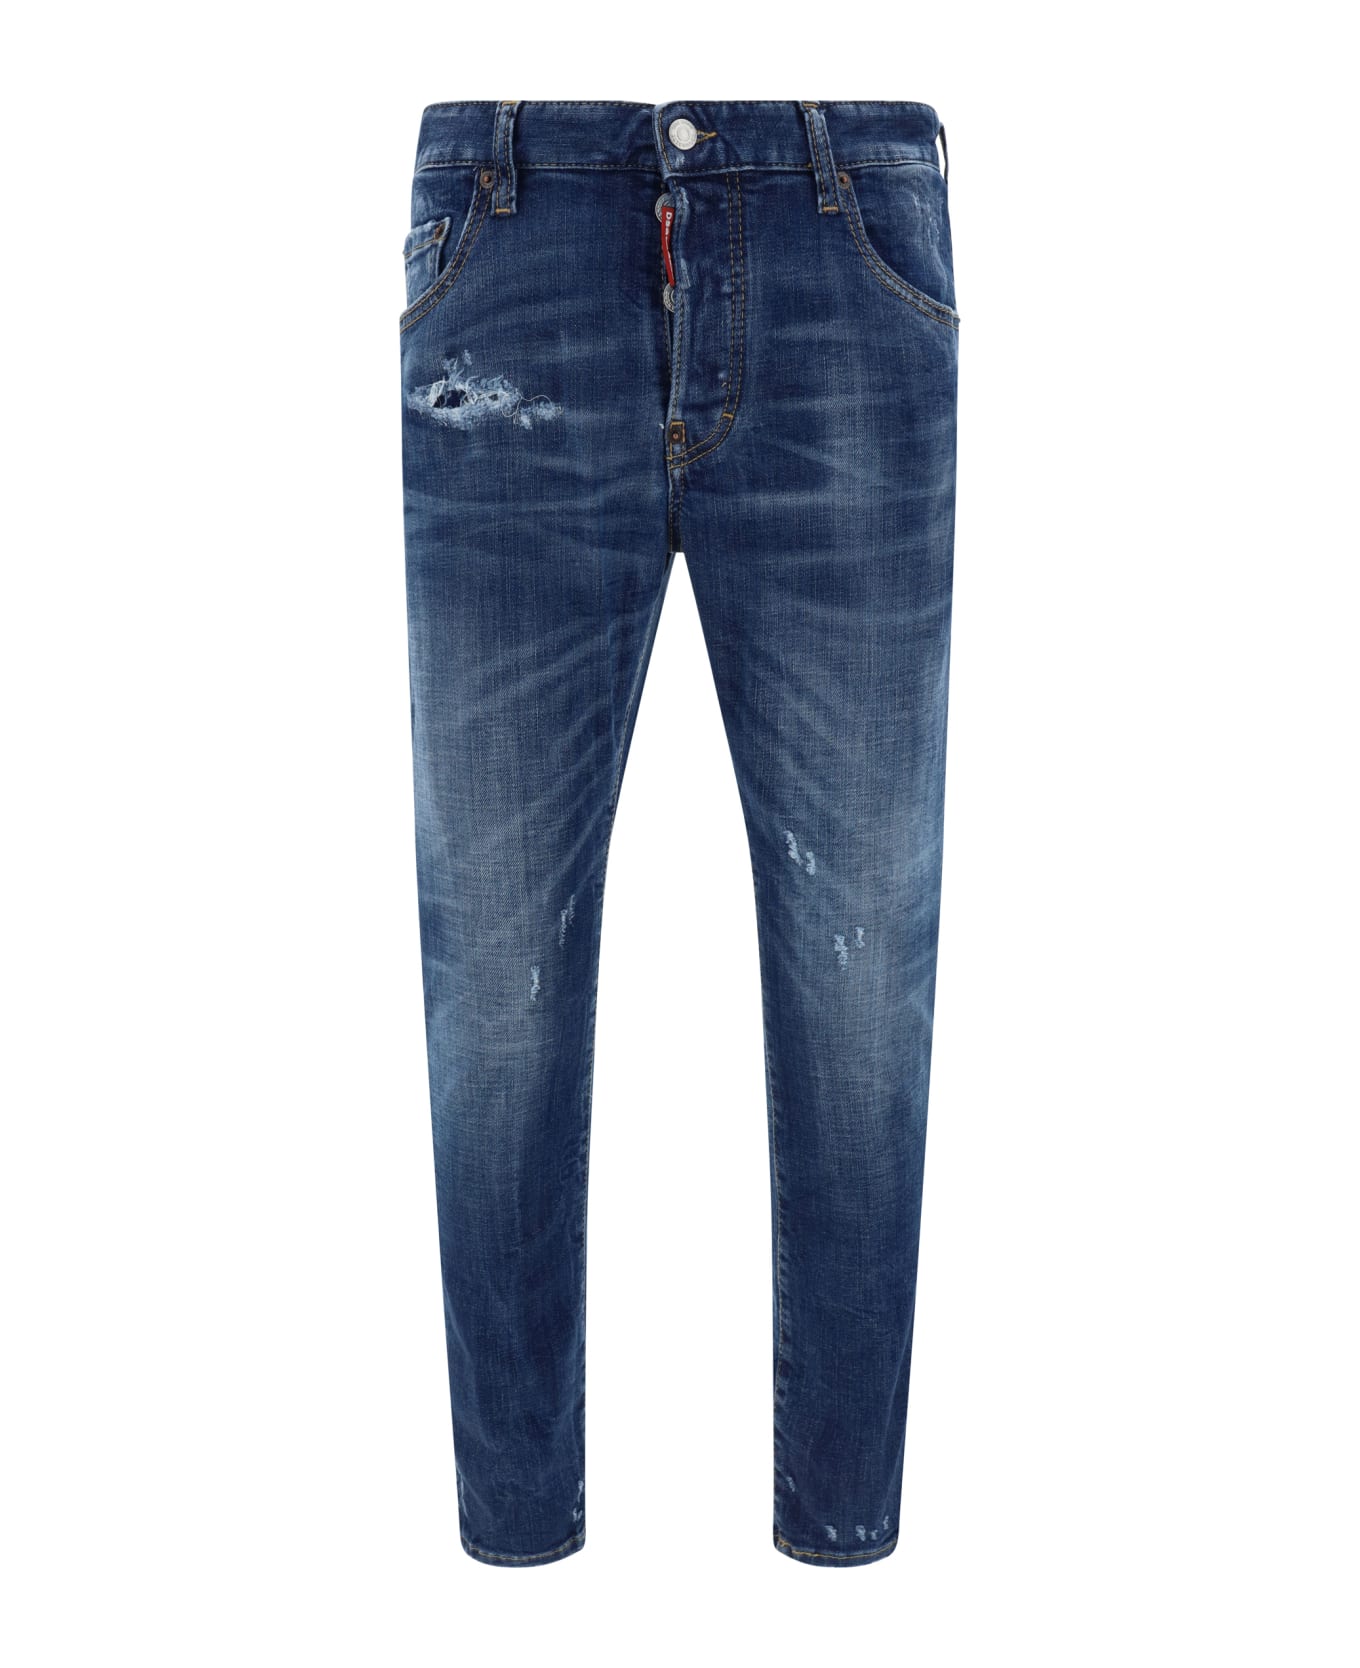 Dsquared2 Super Twinky Jeans - Navy Blue デニム